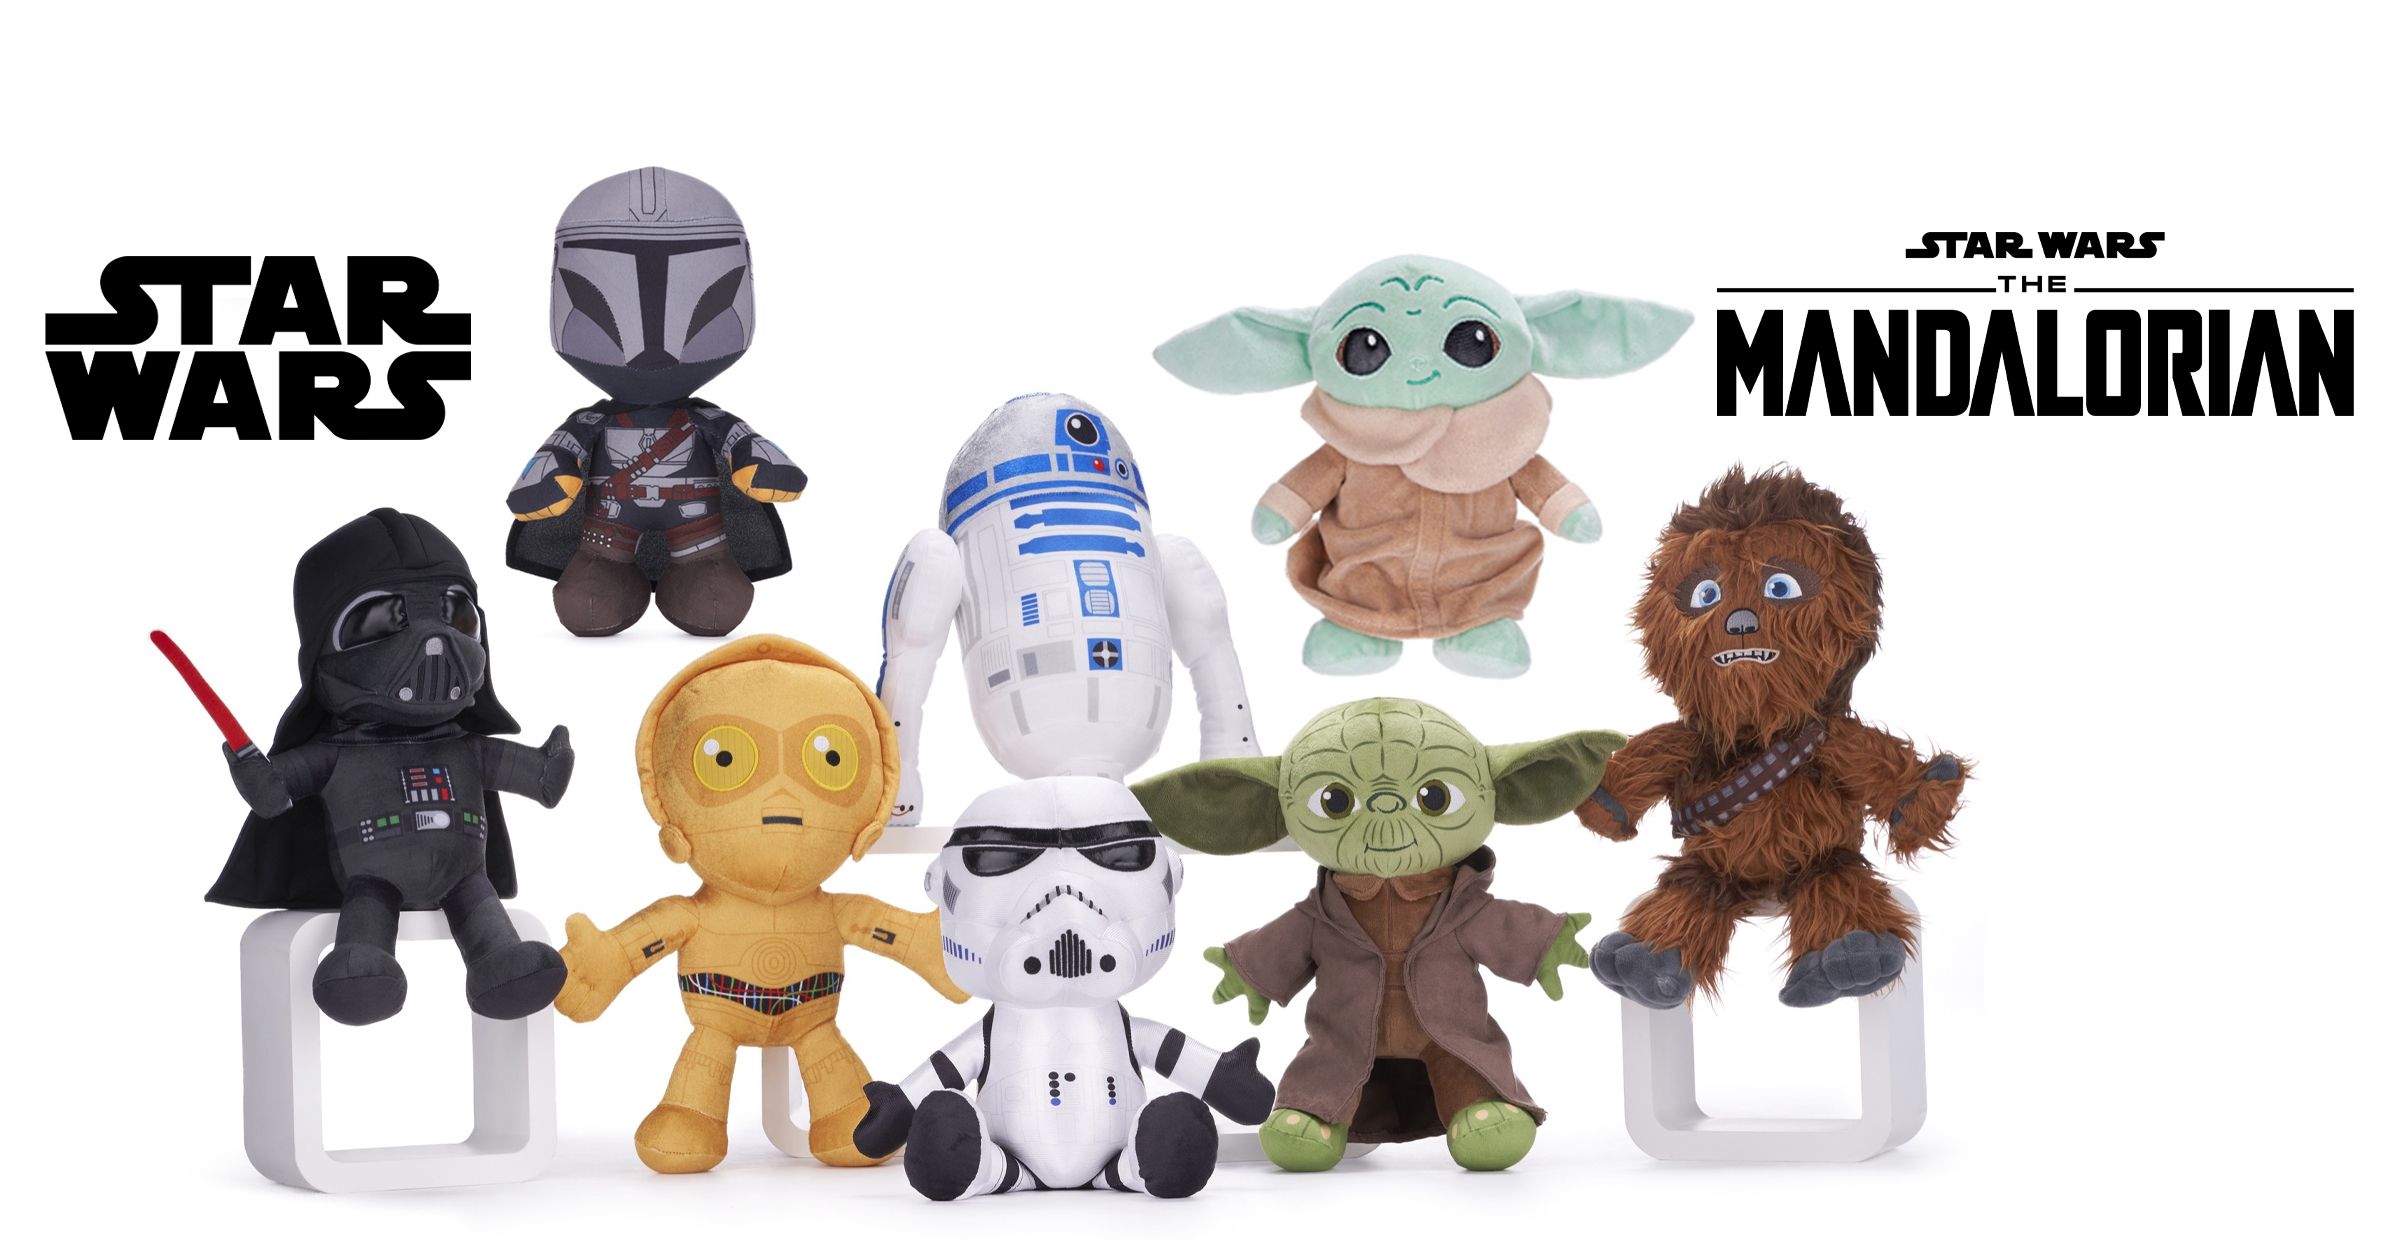 Star Wars and The Mandalorian Toys & Gifts